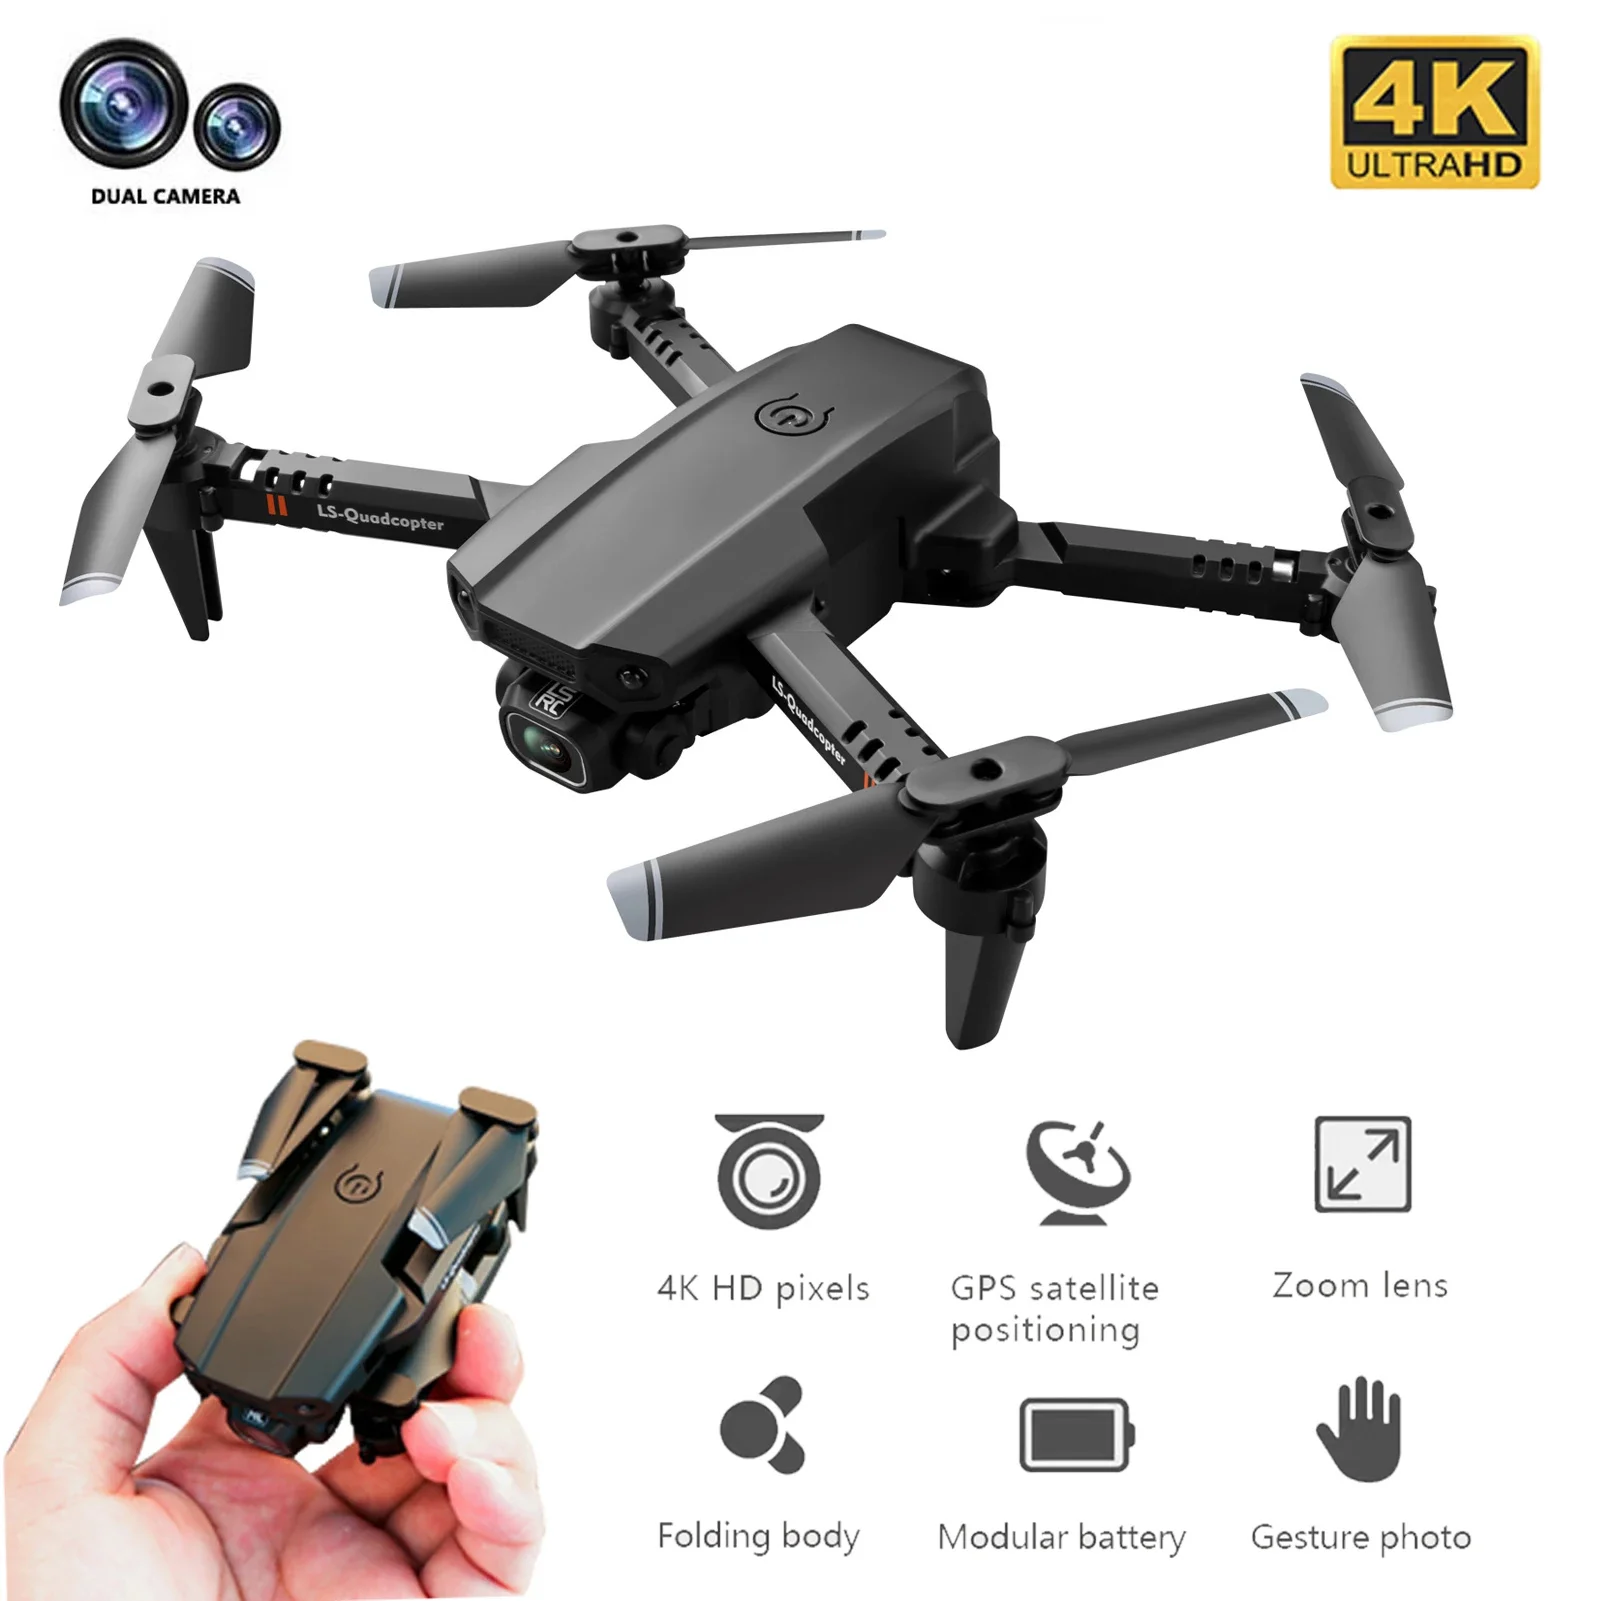 

XT6 Mini Drone 4K 1080P HD Camera Aerial Photography WiFi Fpv Air Pressure Altitude Hold Foldable Quadcopter RC Dron Kid gifts